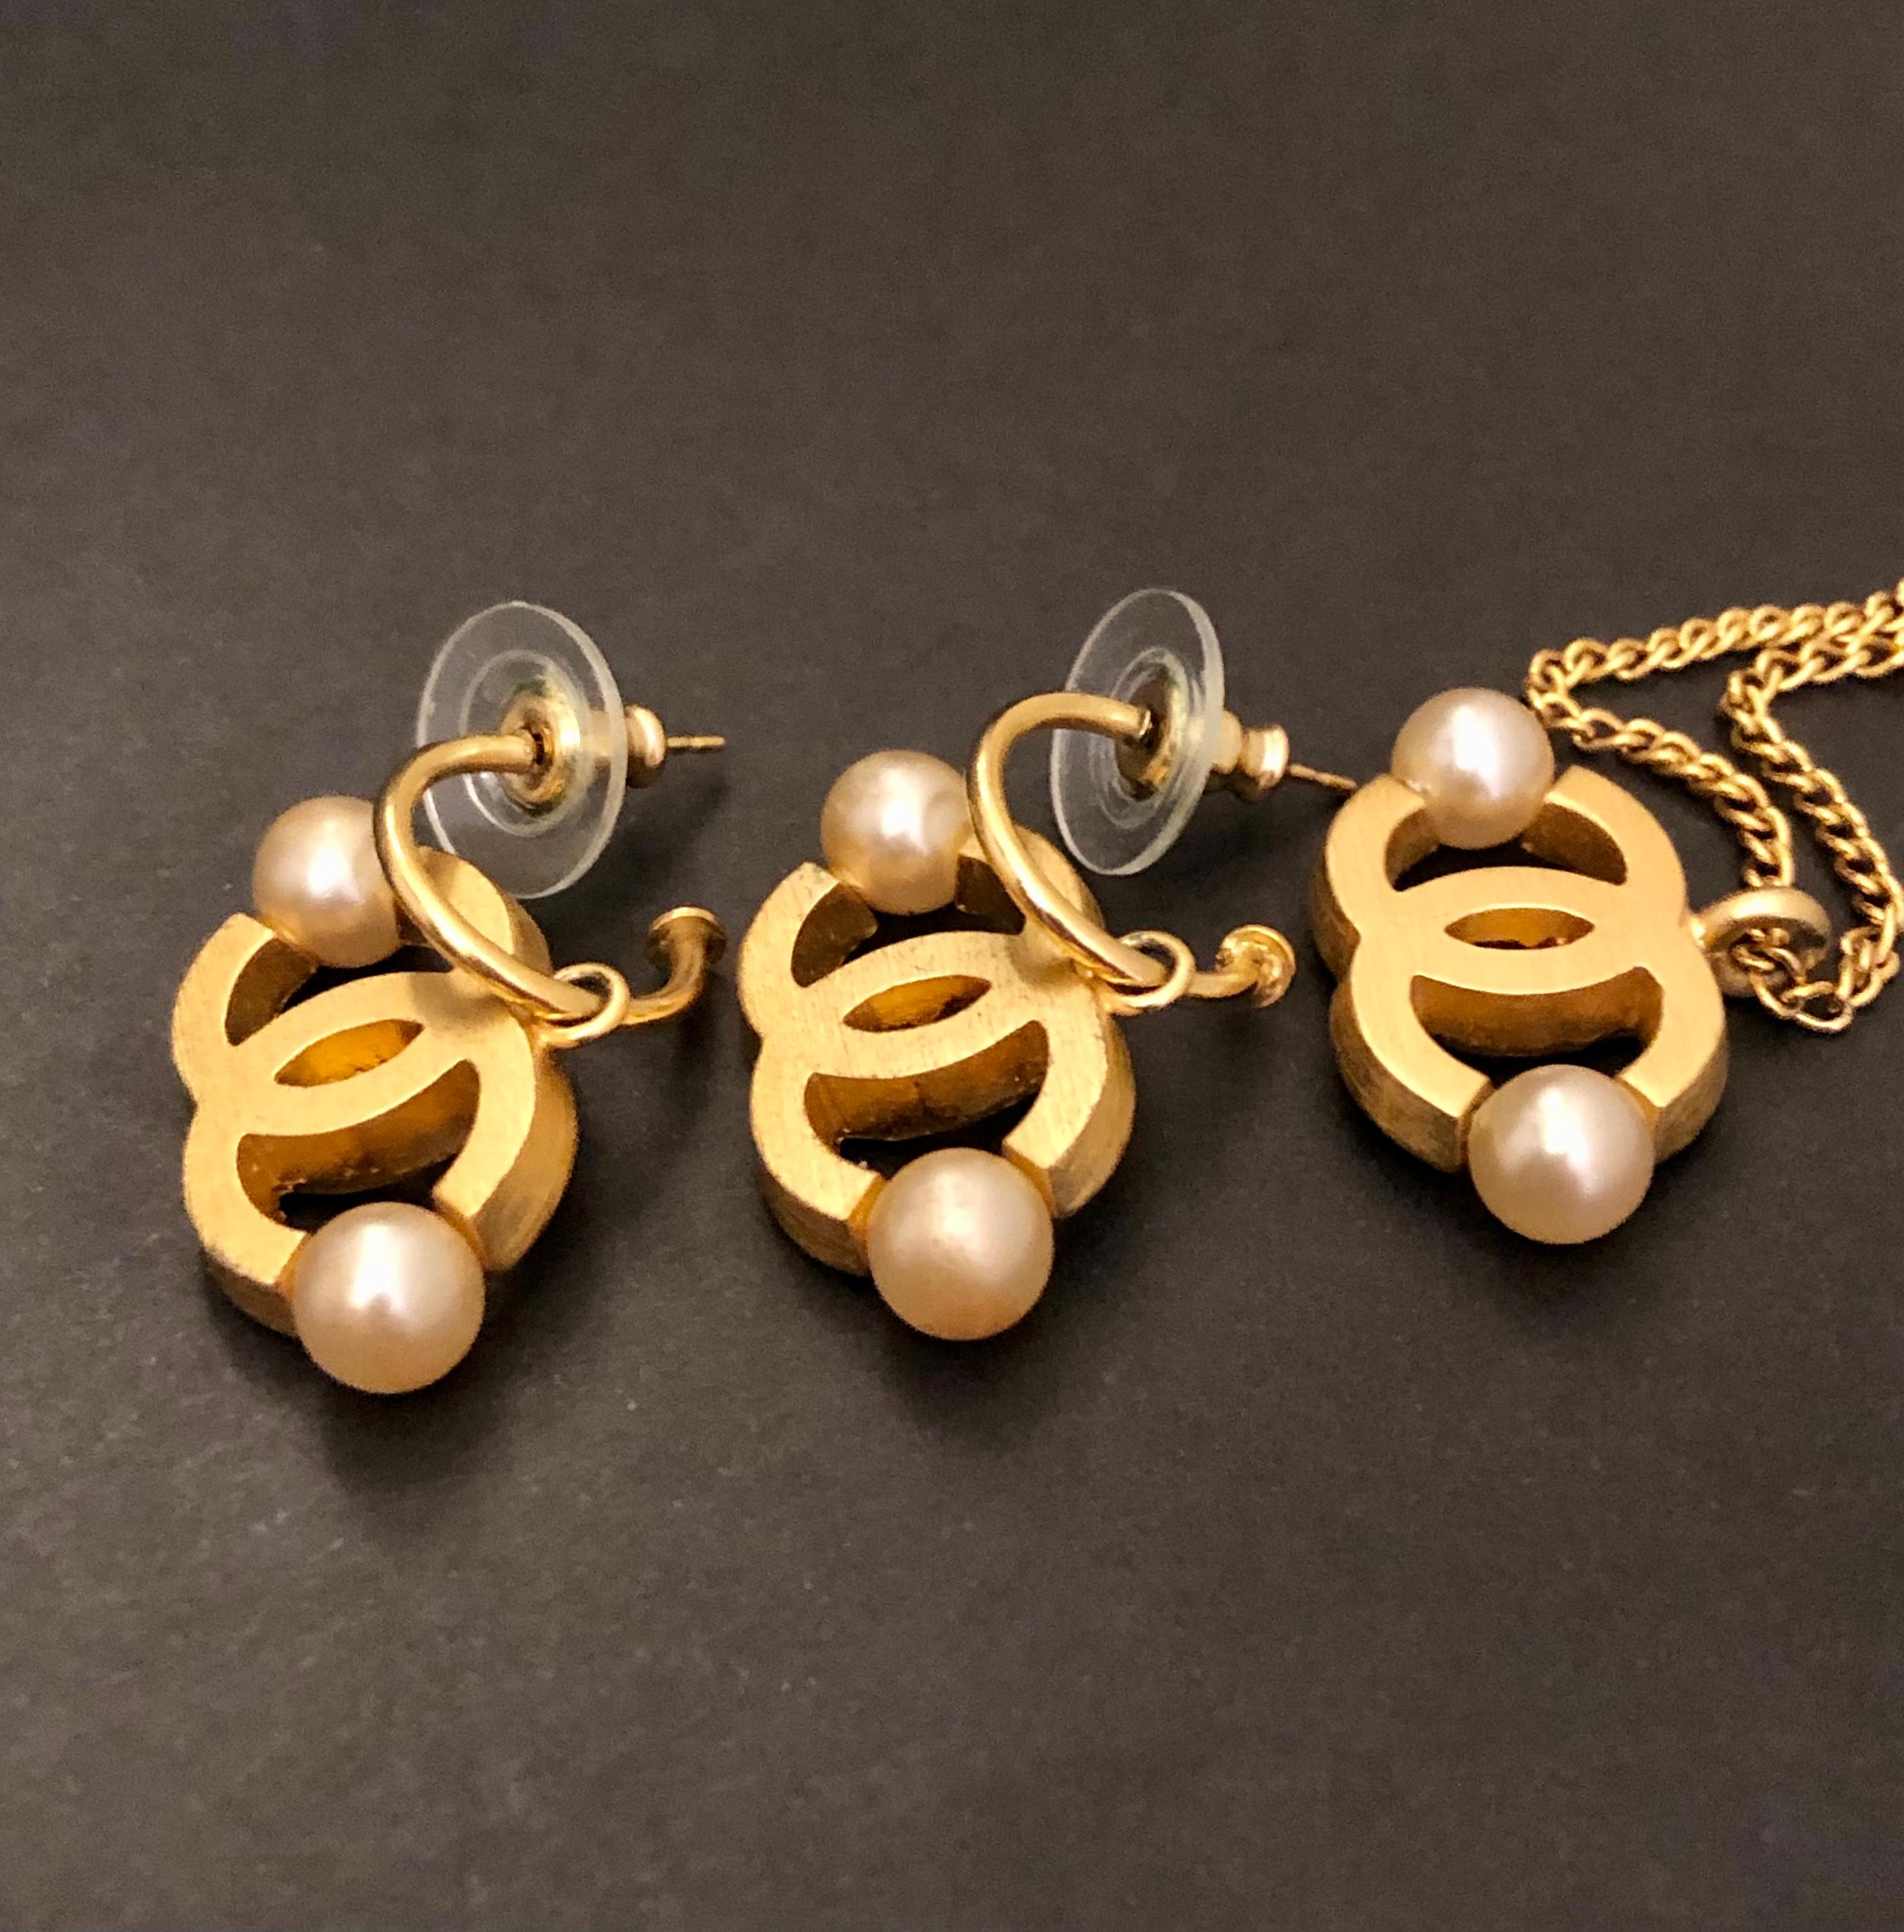 2002 Vintage CHANEL Faux Pearl Gold Toned CC Necklace Earrings Set 2